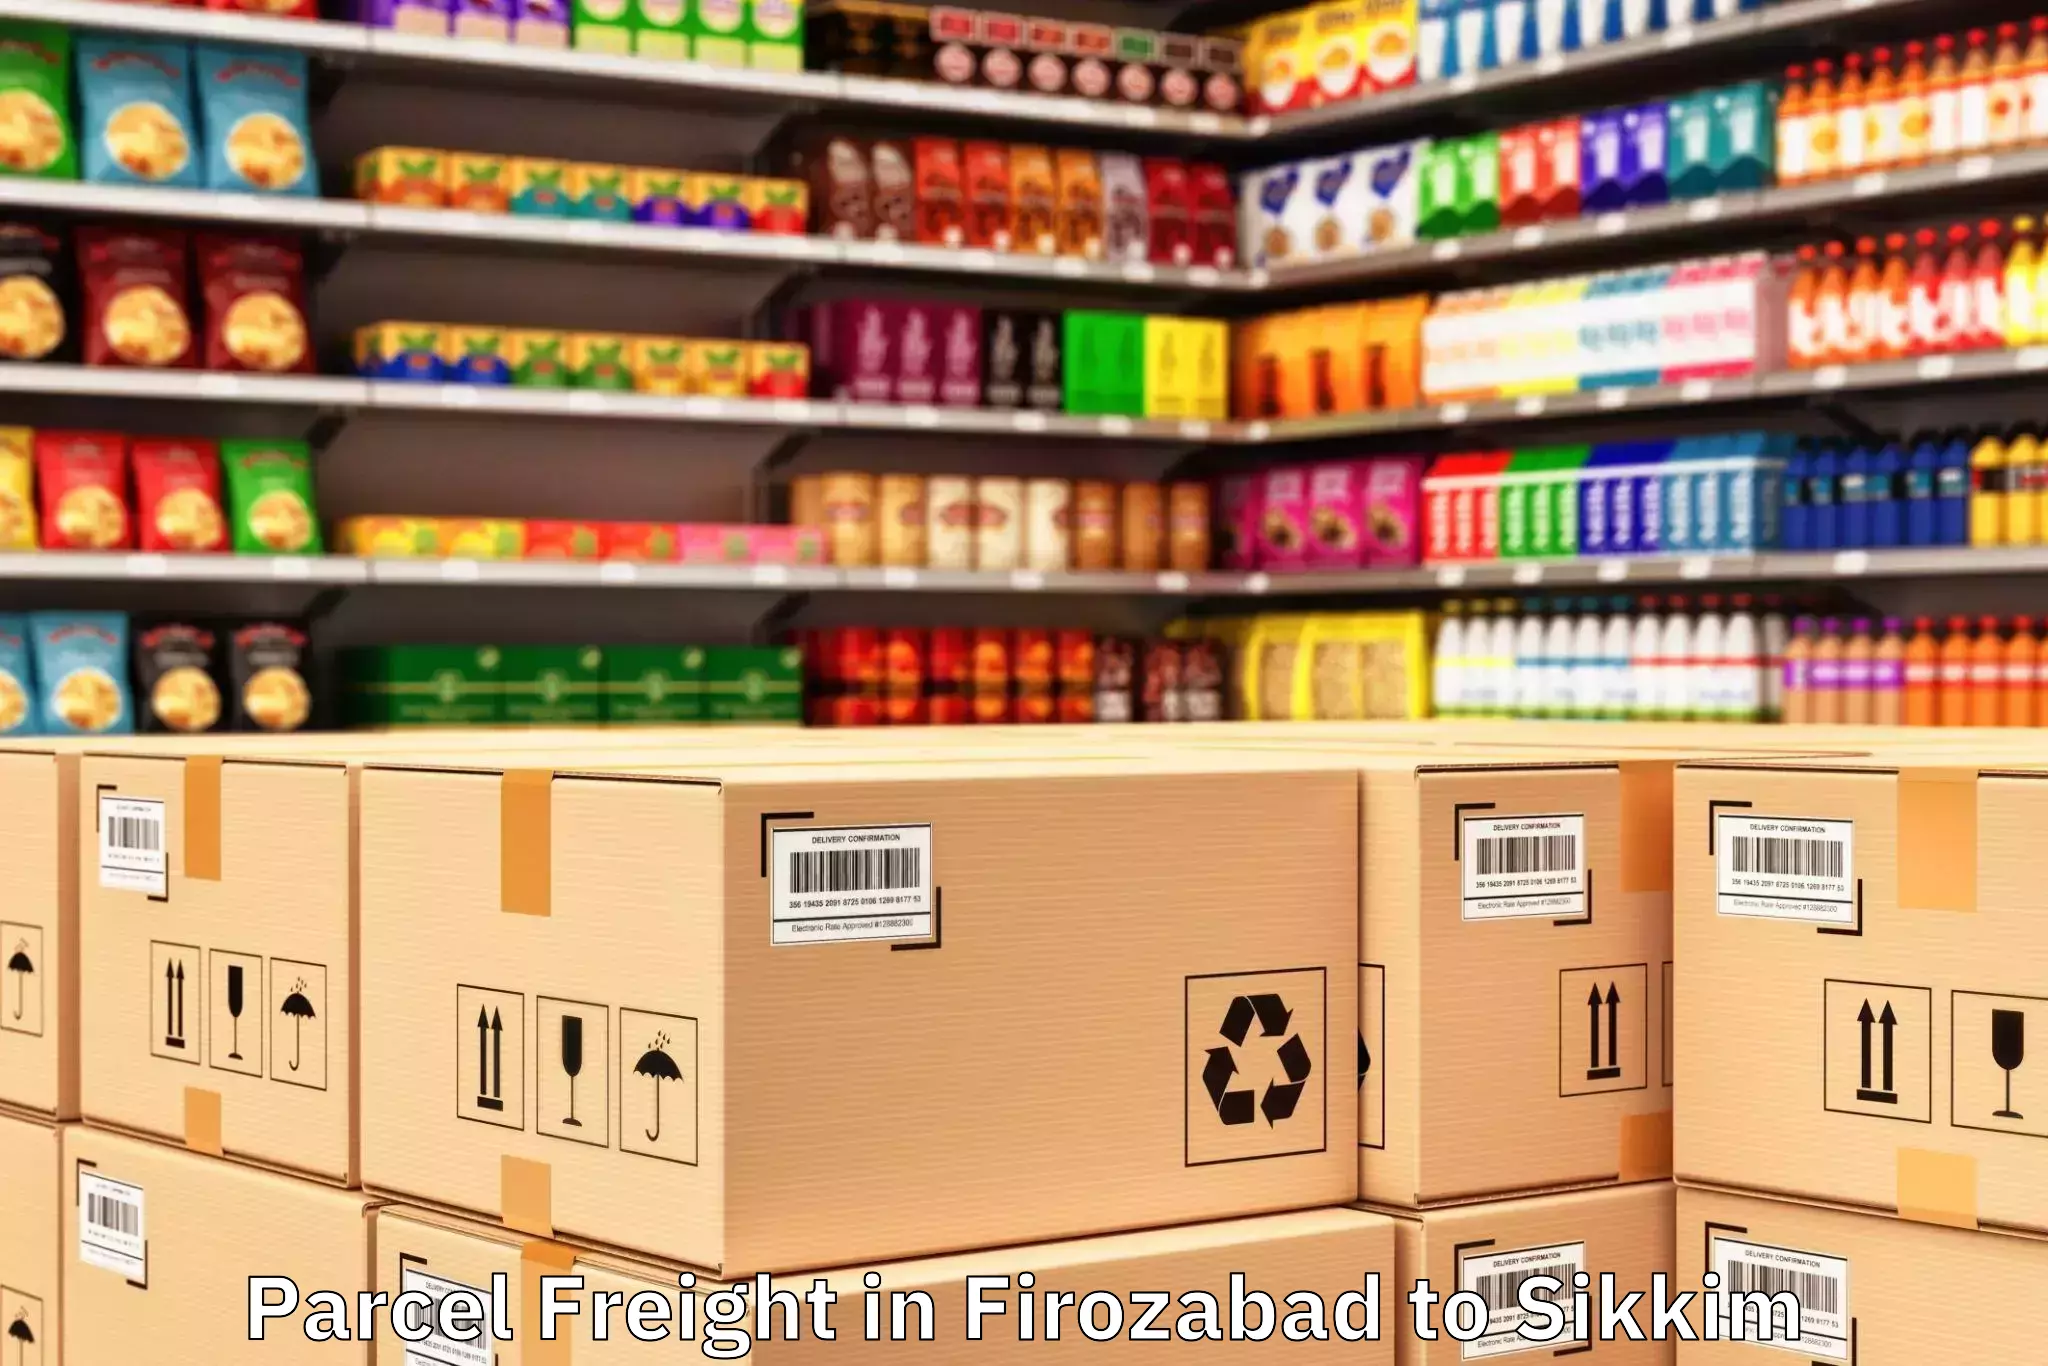 Top Firozabad to Ranipool Parcel Freight Available